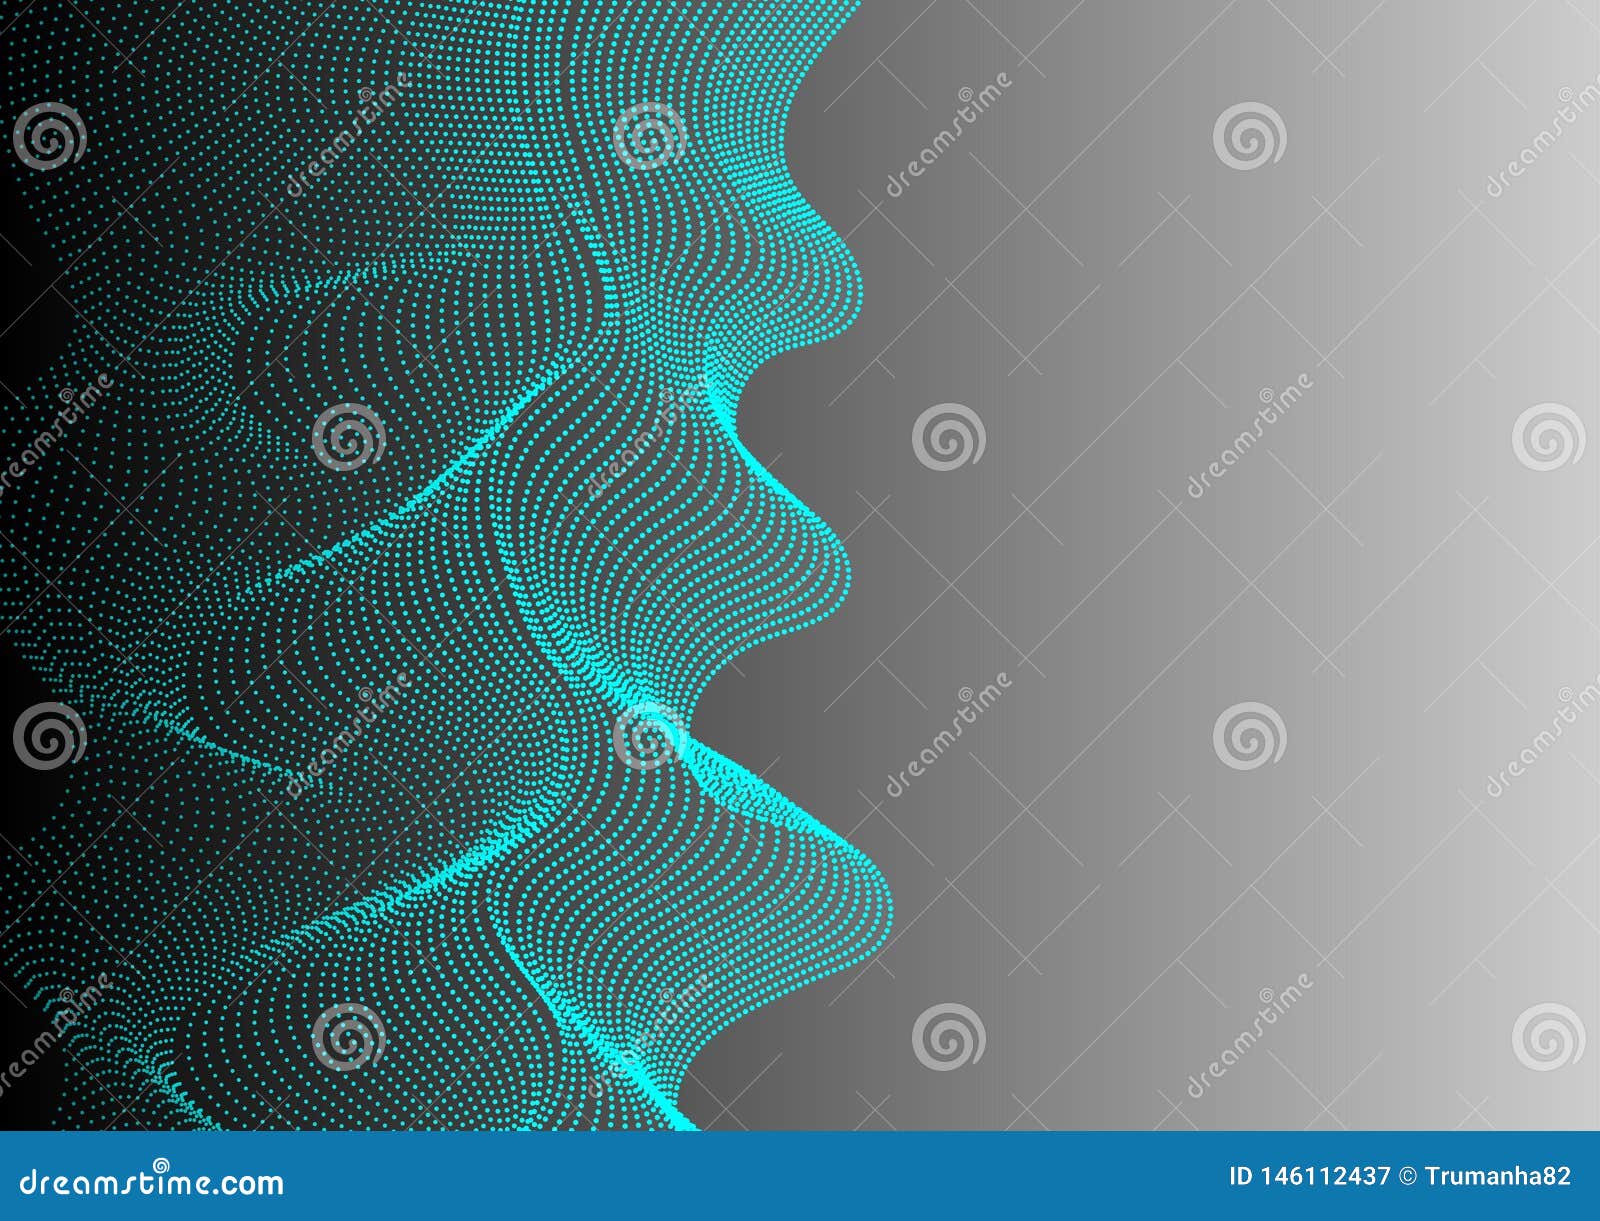  abstract shiny cyan curves in dark grey gradient background